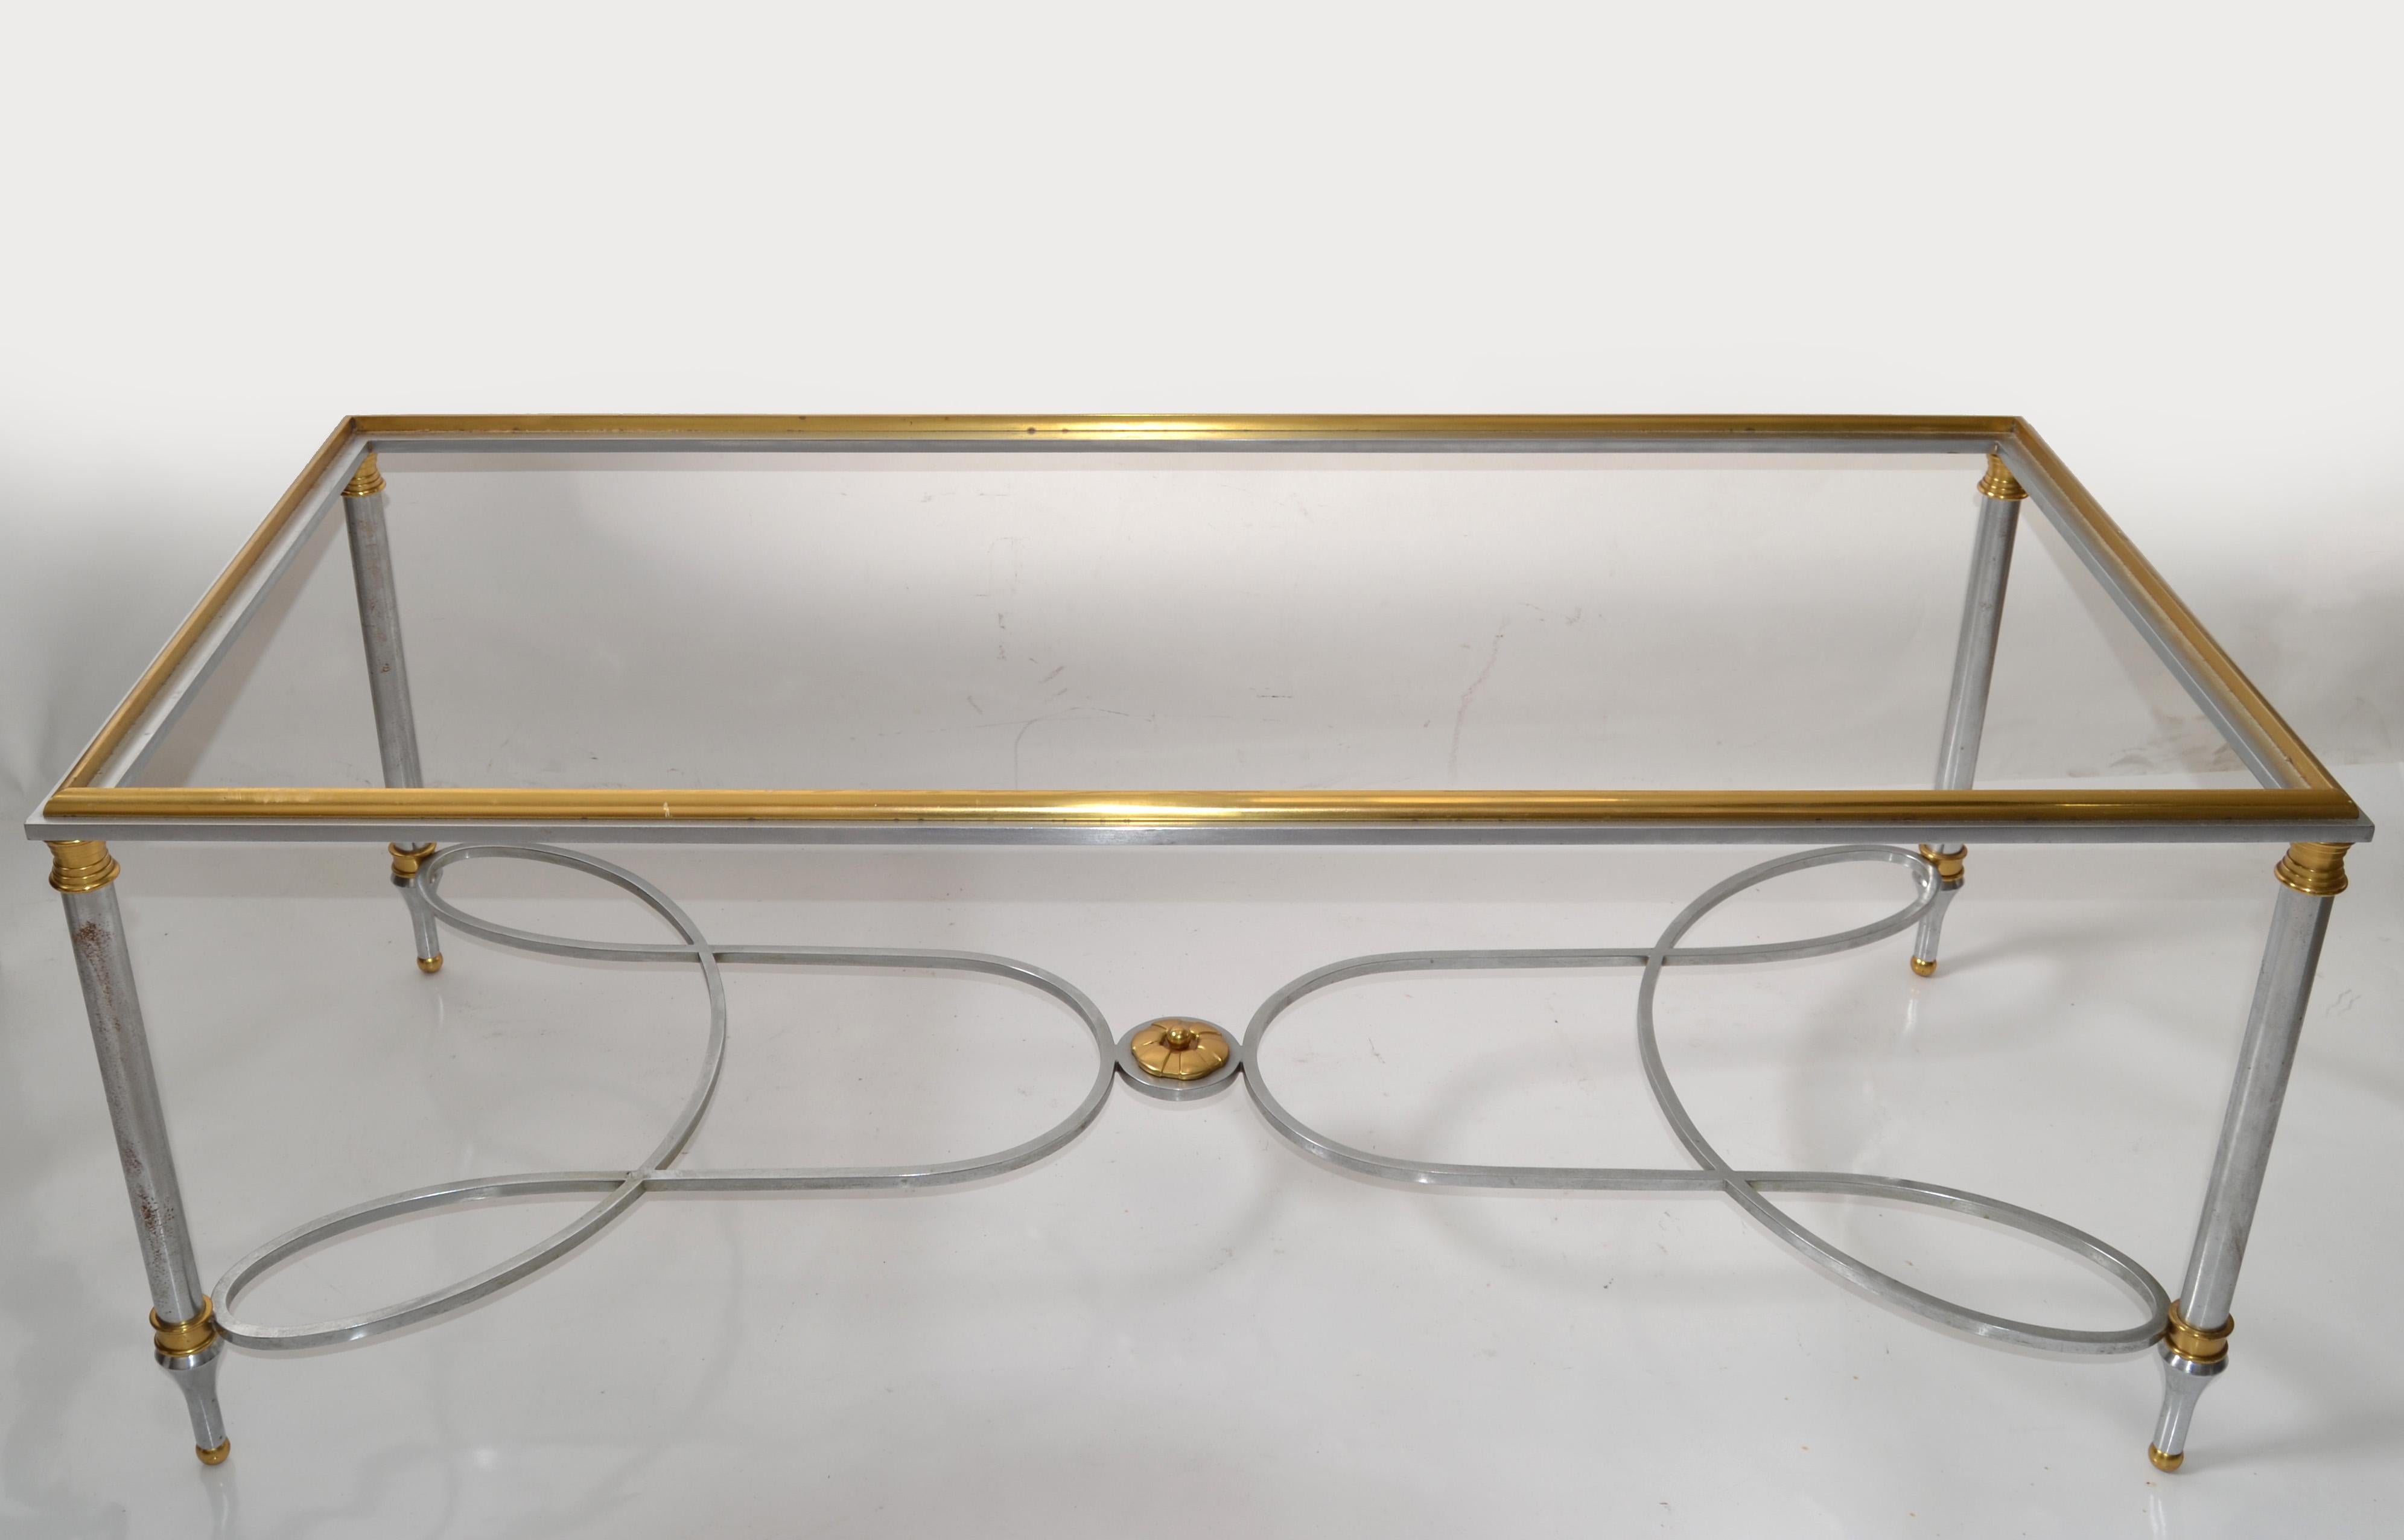 Polished 1970s Maison Charles French Steel Brass Glass Coffee Table Mid-Century Modern  For Sale